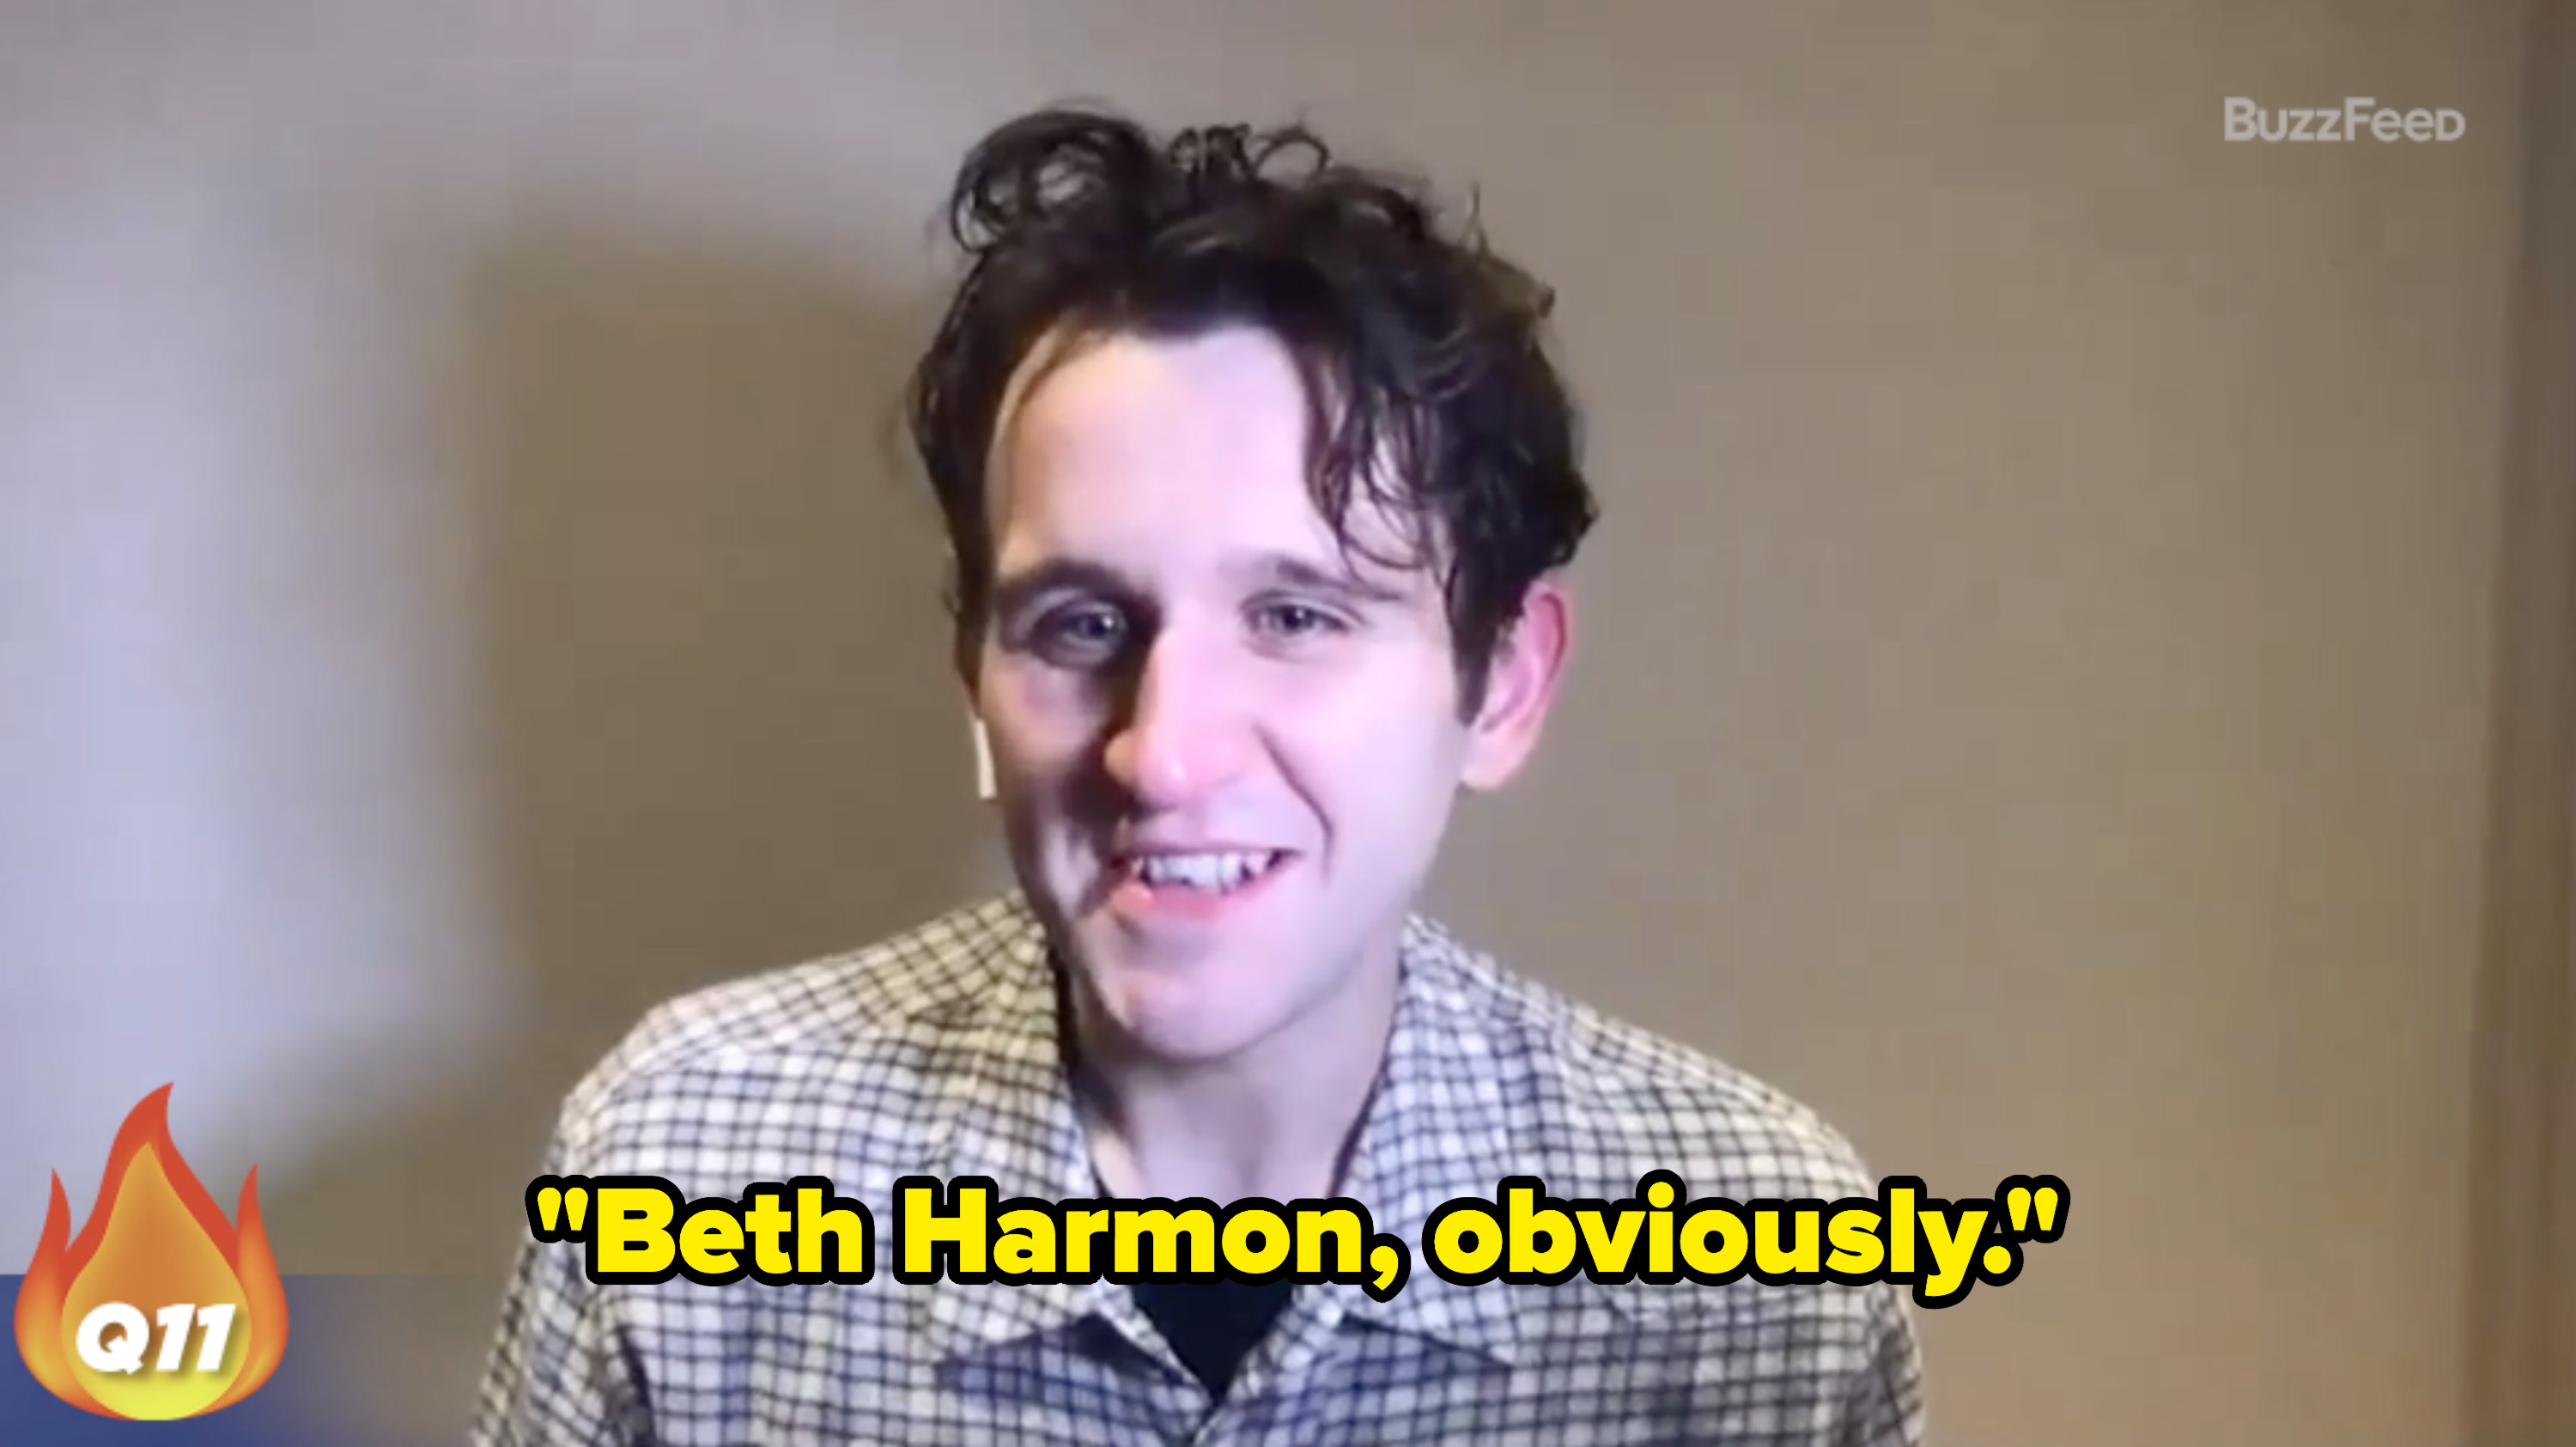 Harry Melling saying &quot;Beth Harmon, obviously&quot;